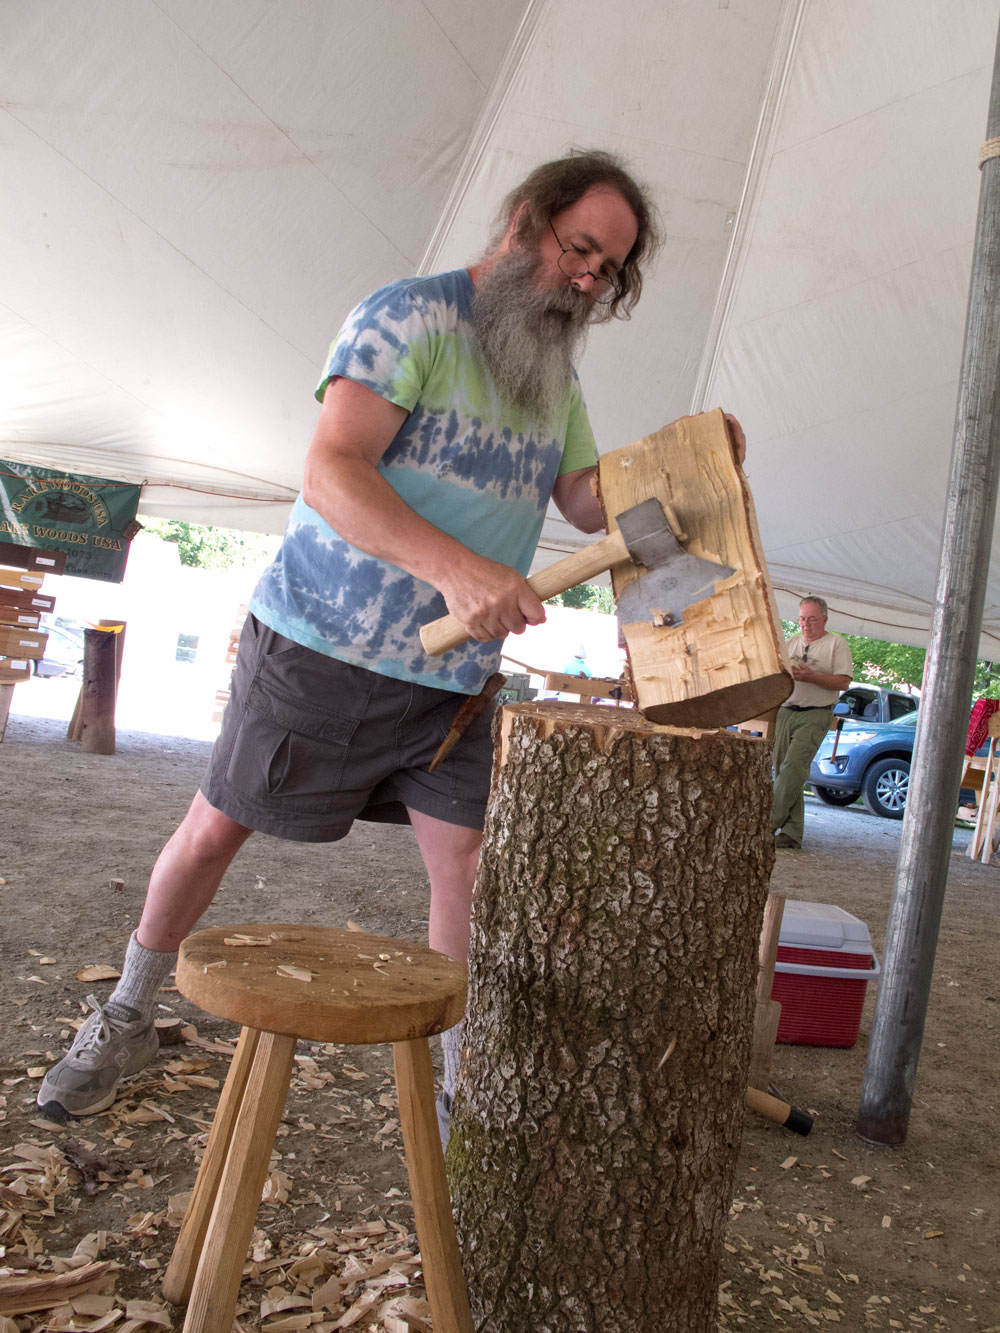 Peter at work on some birch at the Lie-Nielsen Open House.